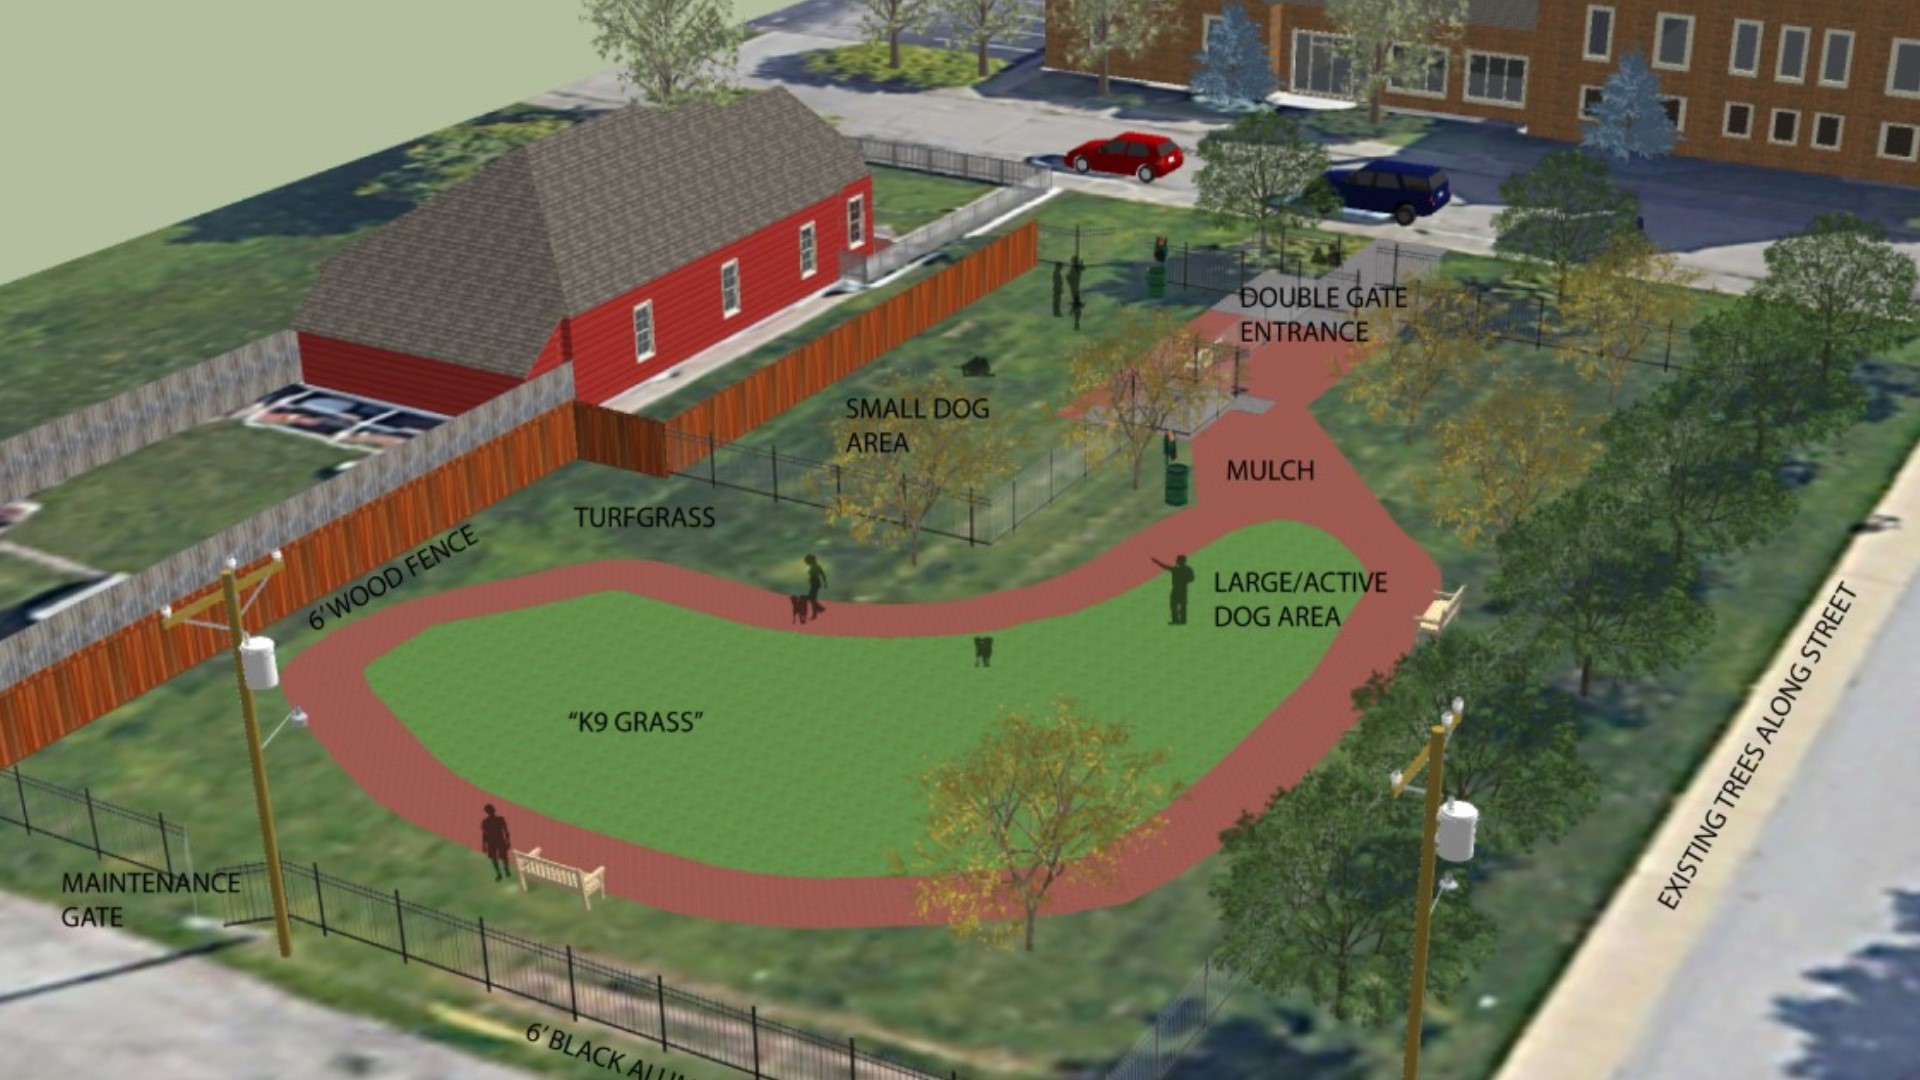 The Dog Park at Immanuel will be located in the Bates-Hendricks neighborhood, which is on the south side of downtown near Fountain Square.